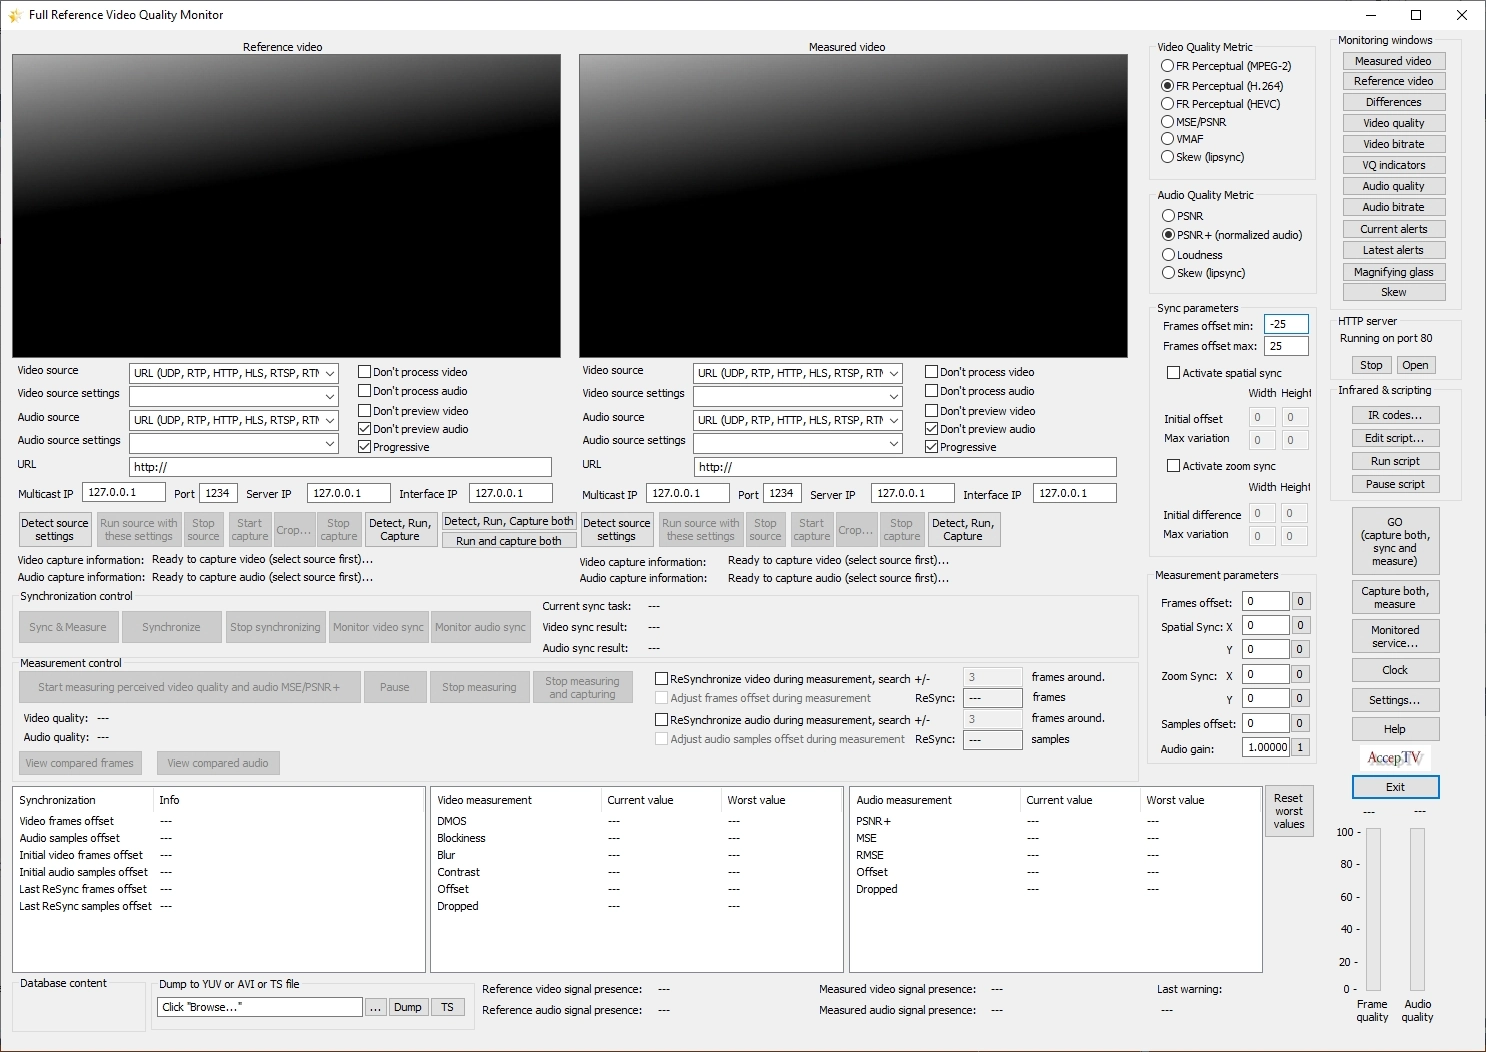 Screenshot of Full Reference Video Quality Monitor #1